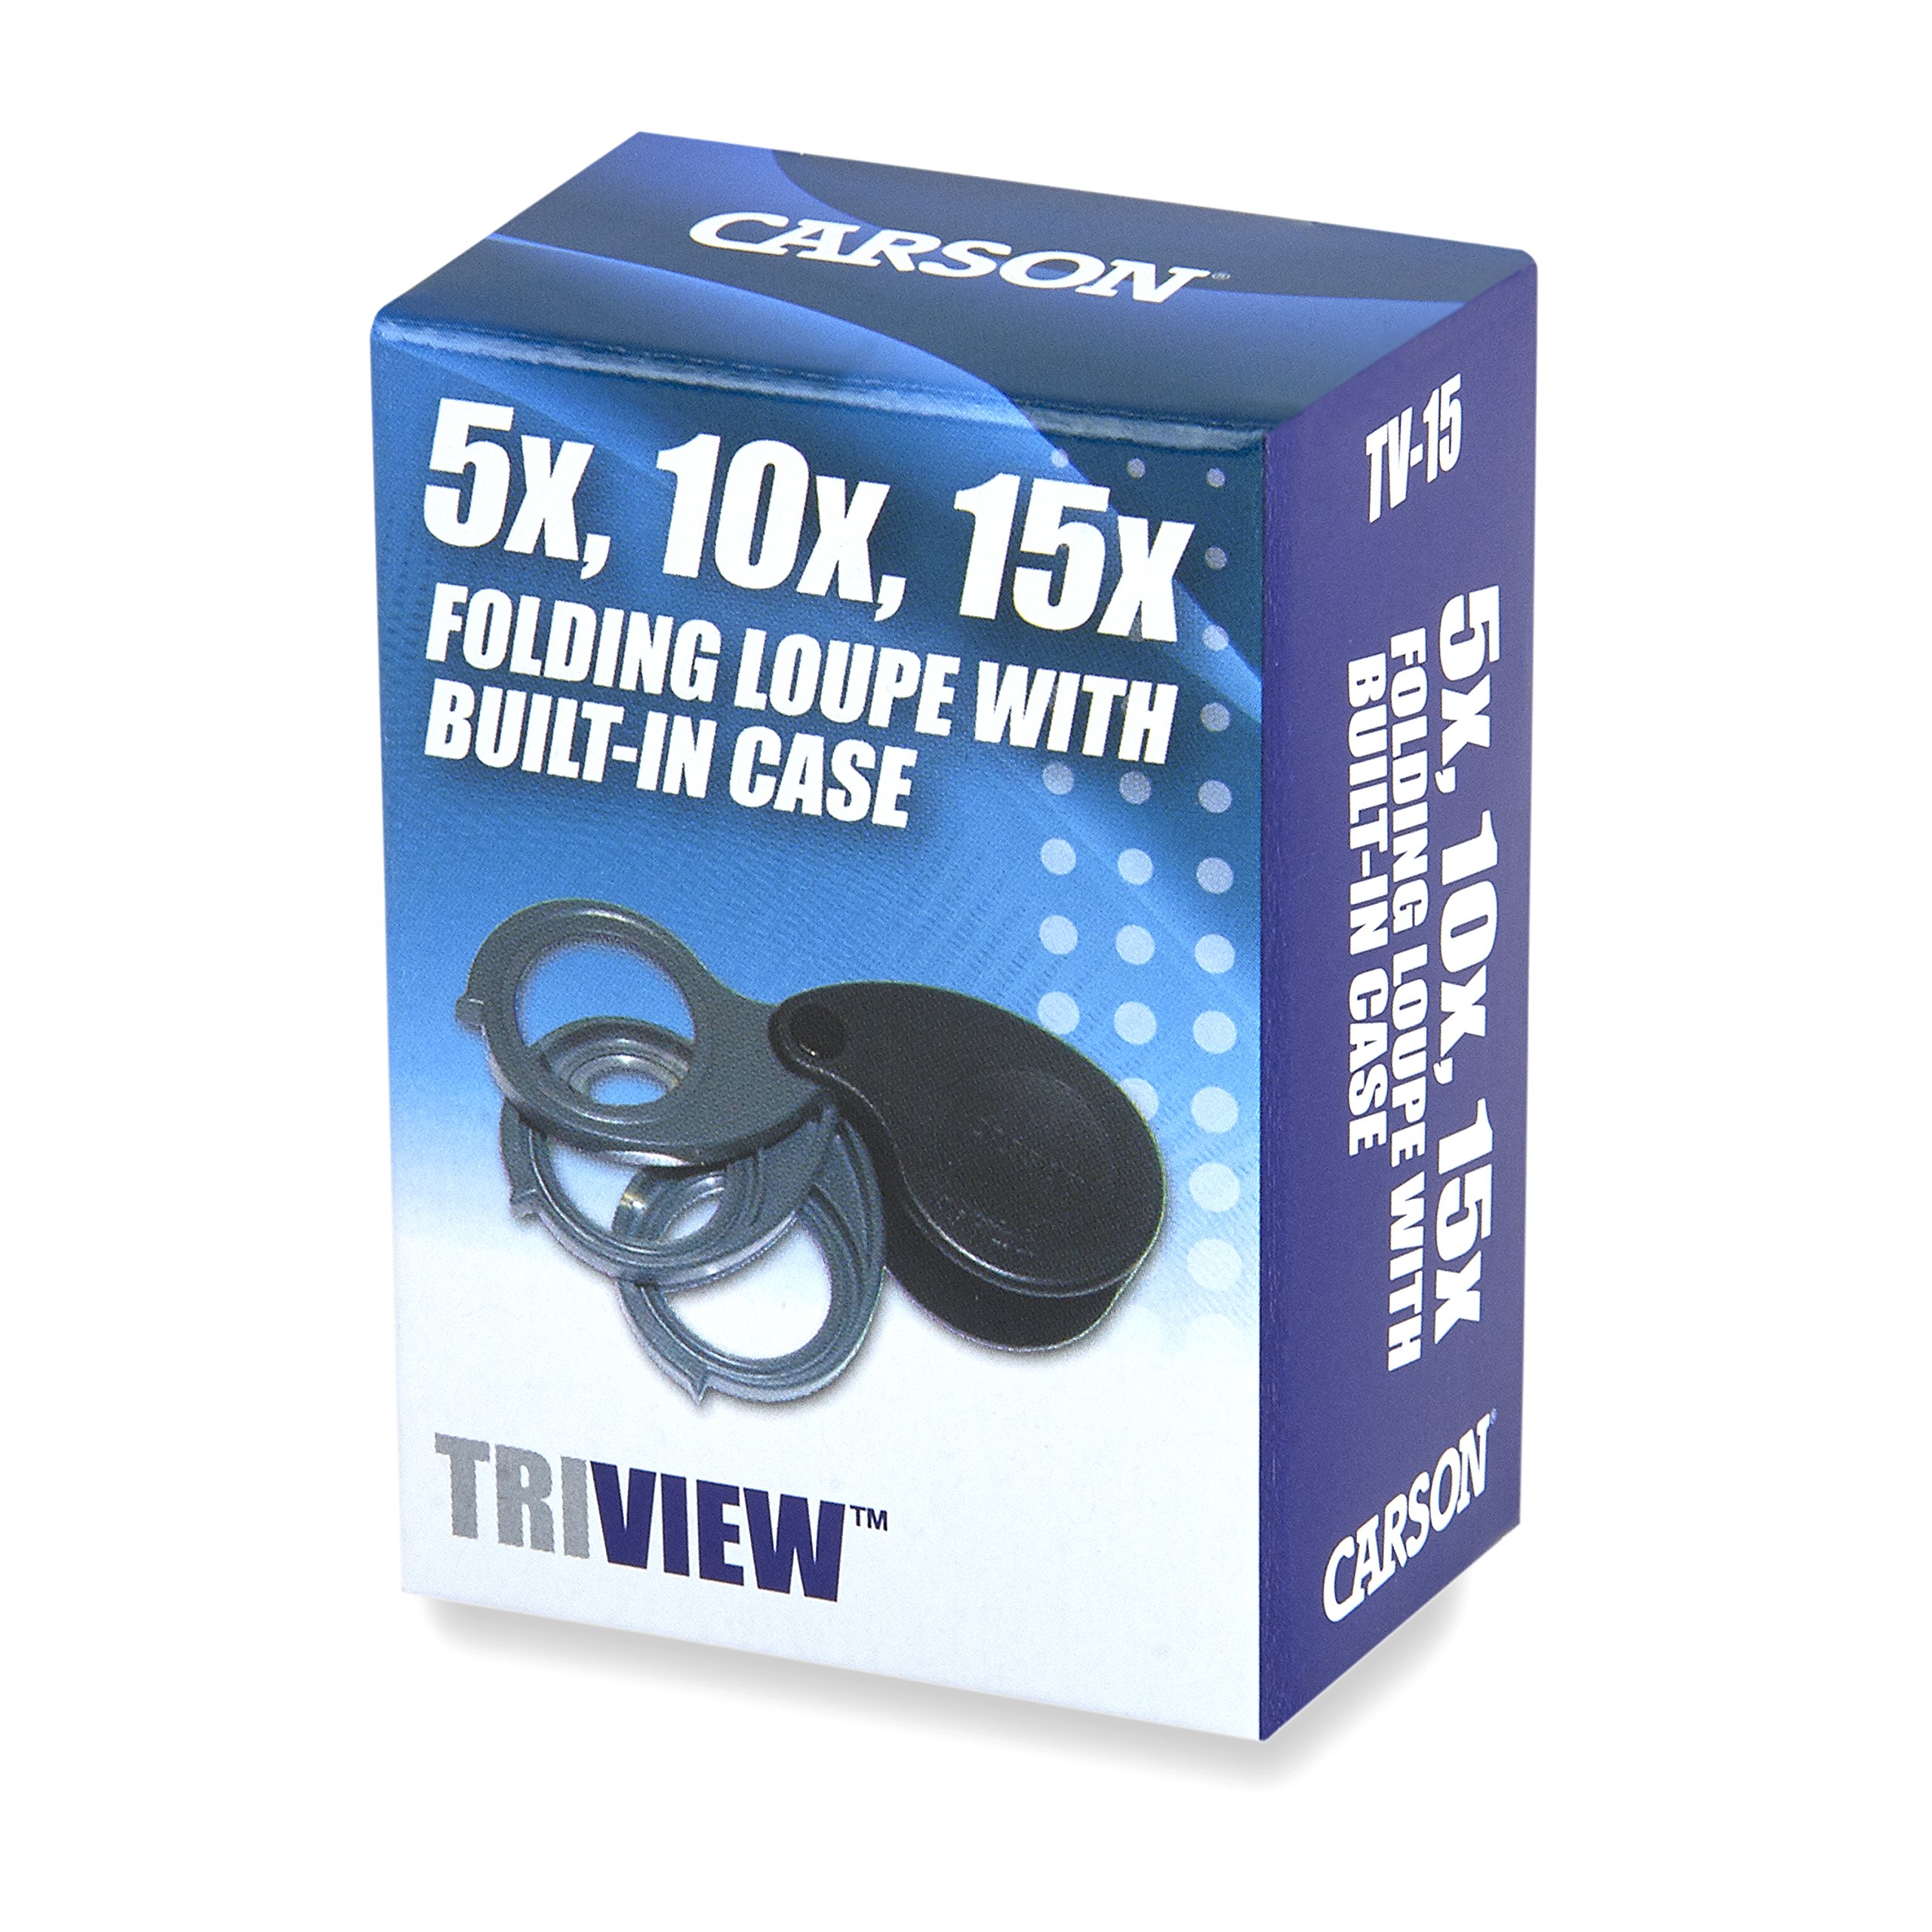 Carson TriView 5x/10x/15x Folding Loupe Magnifier with Built-in Case (TV-15), Black